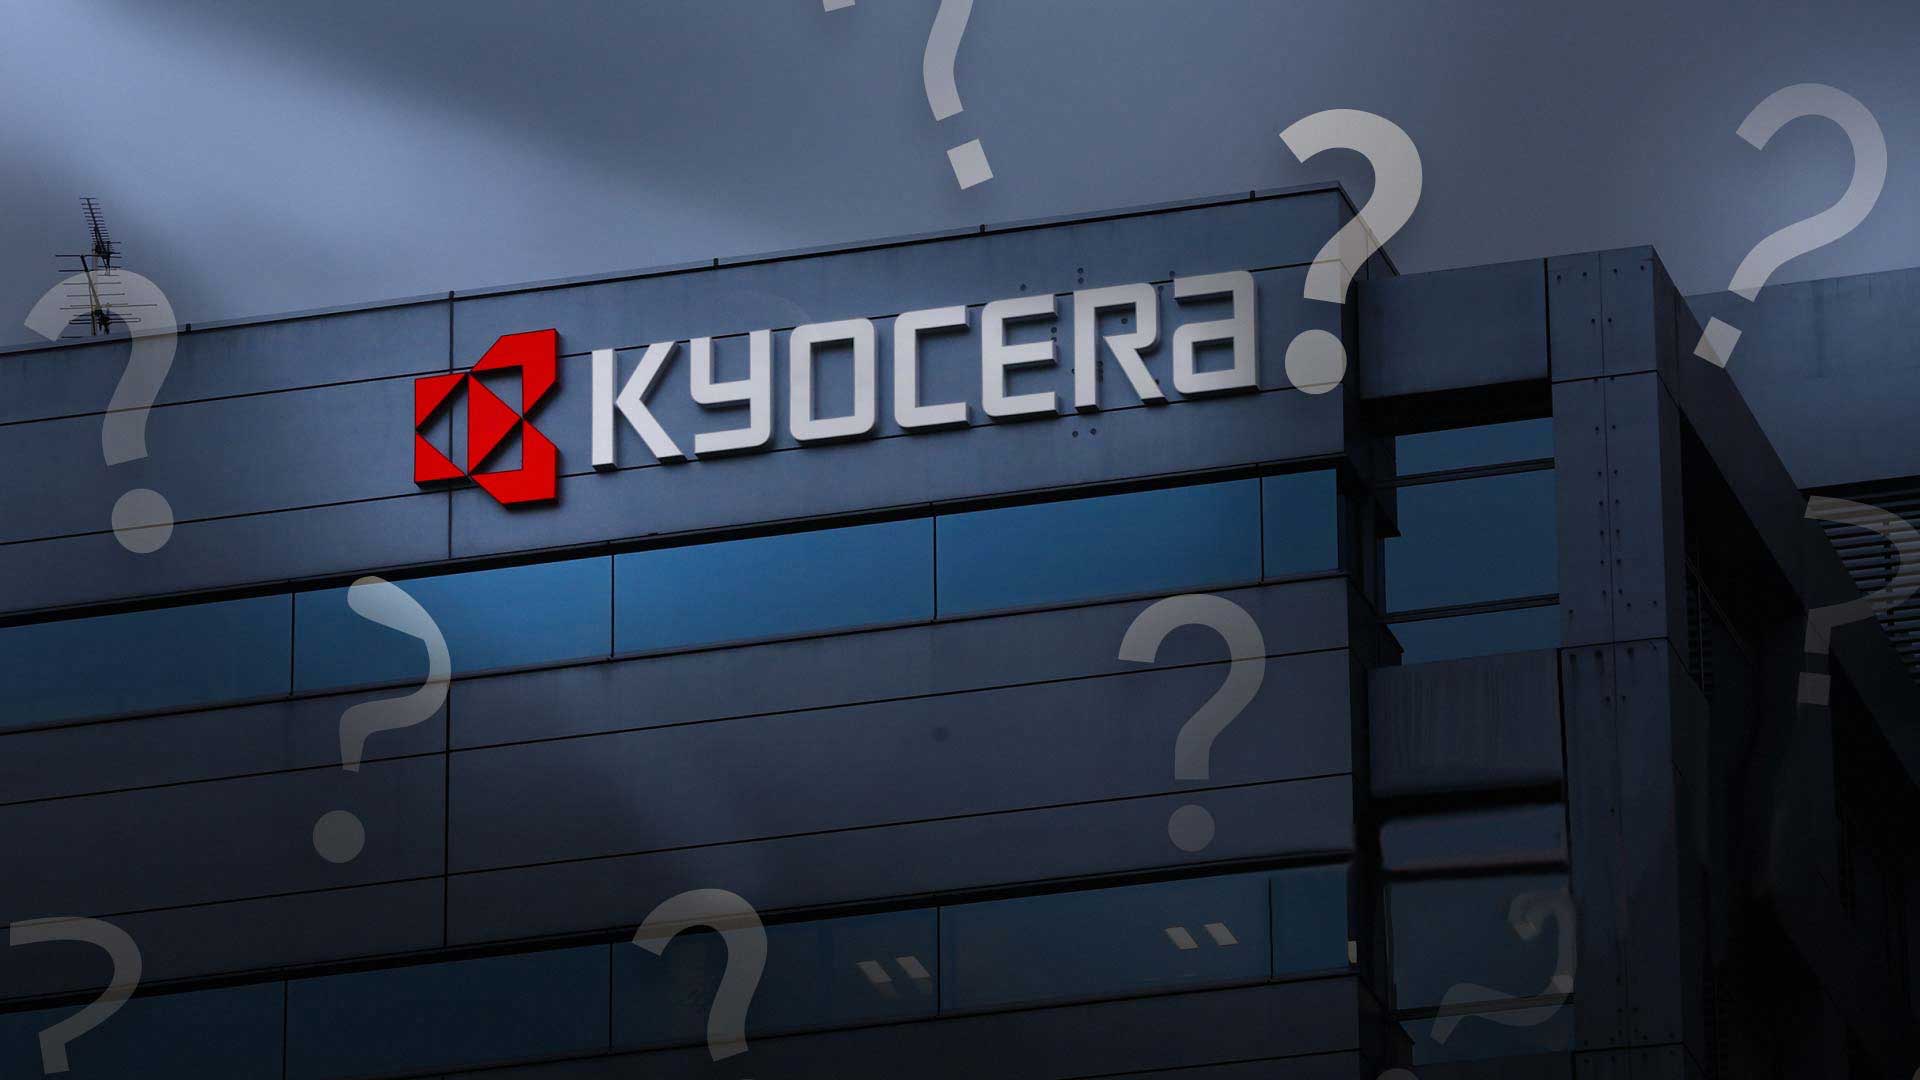 Who Is Kyocera? 